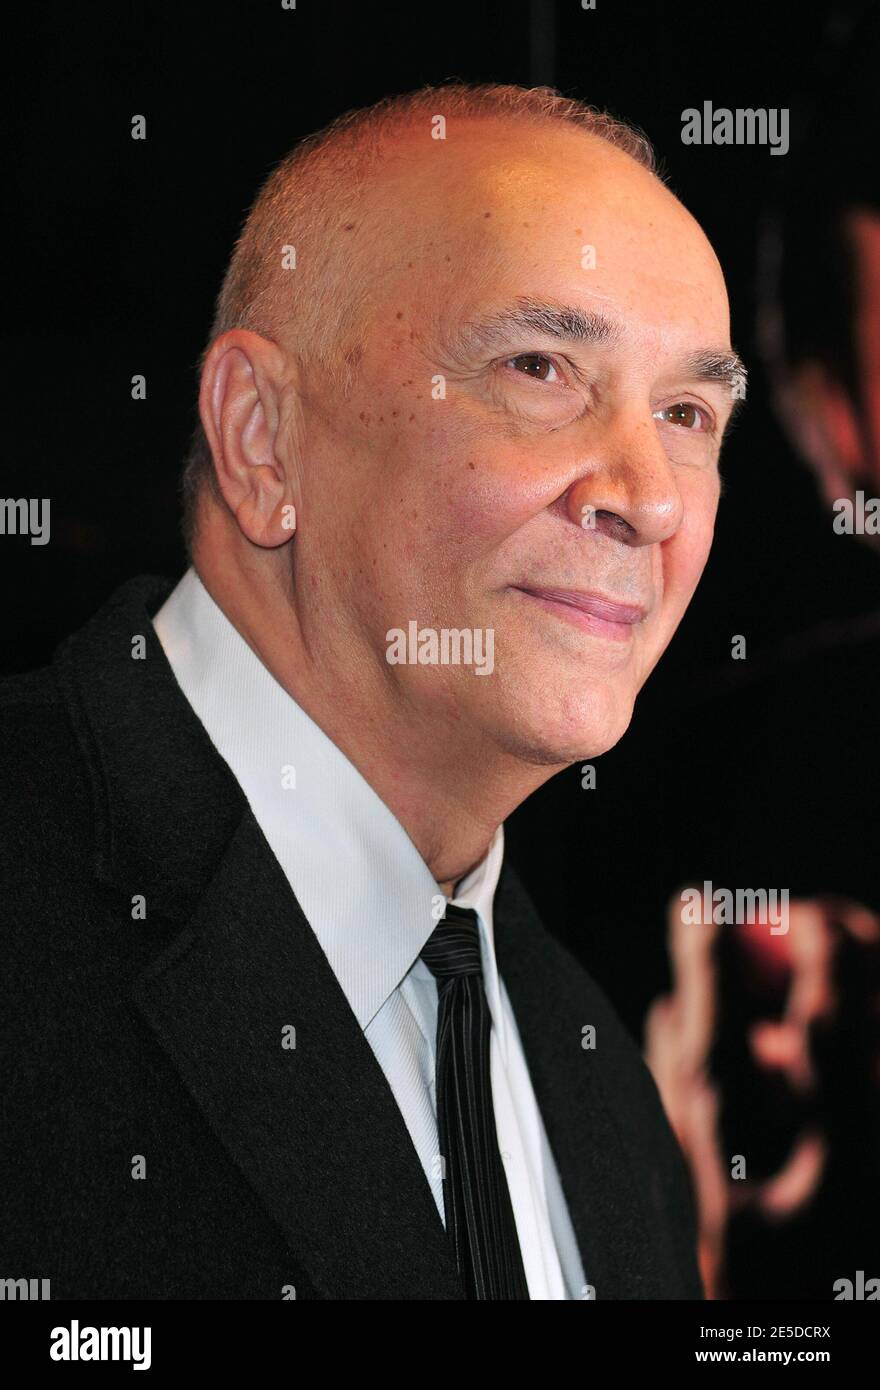 Cast member Frank Langella arriving for the premiere of 'Frost/Nixon' at the Ziegfeld Theater in New York City, NY, USA on November 17, 2008. Photo by Gregorio Binuya/ABACAPRESS.COM Stock Photo